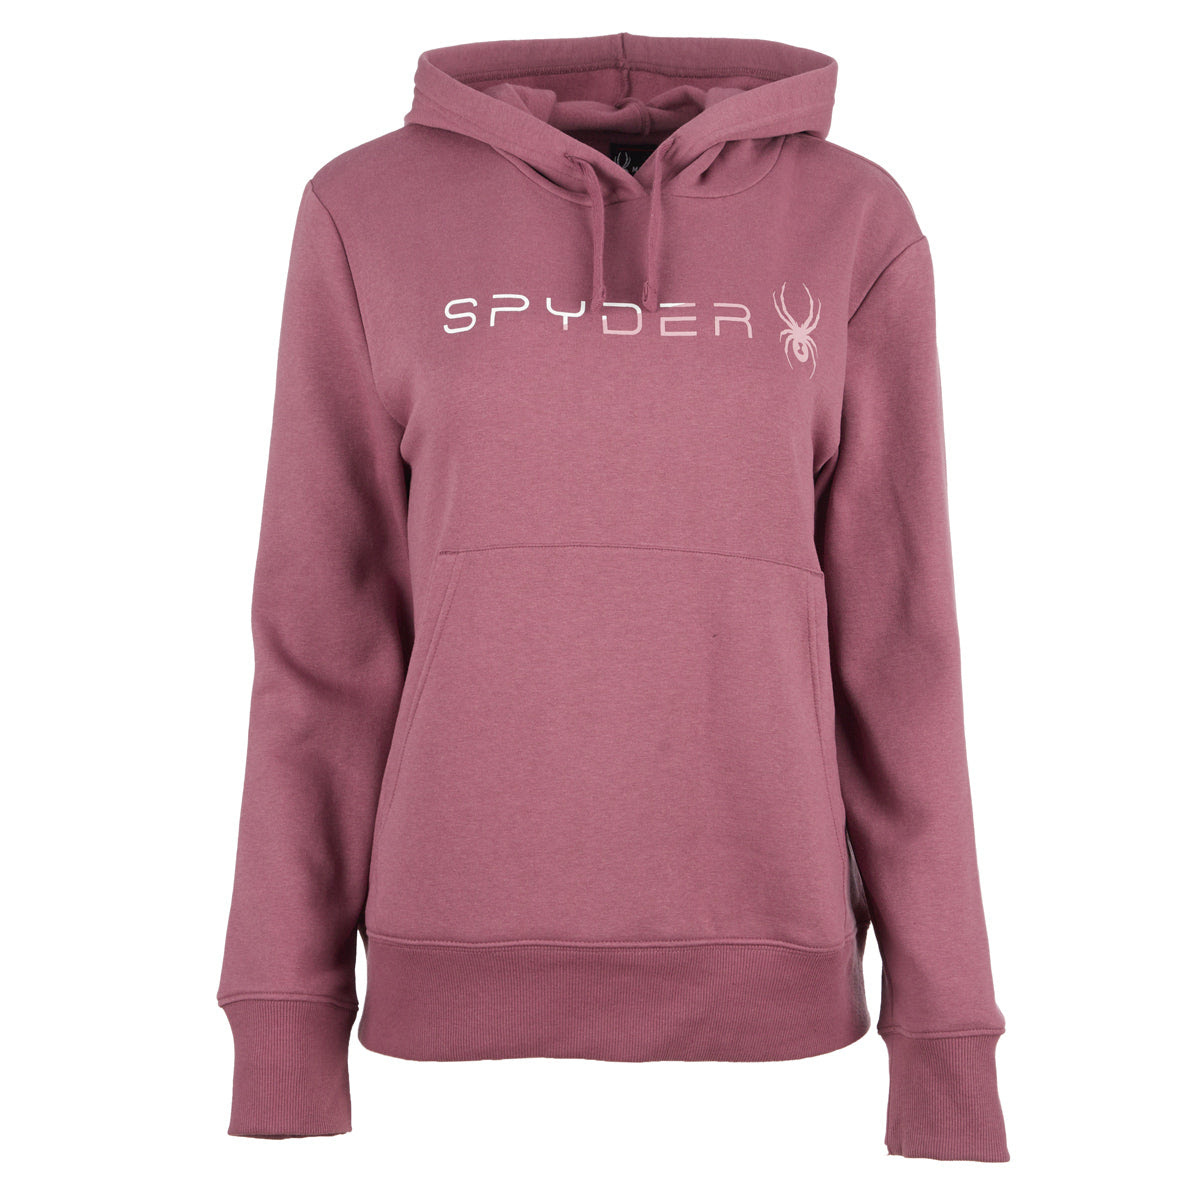 Spyder Women's Fade Graphic Hoodie for $28.99+FS!